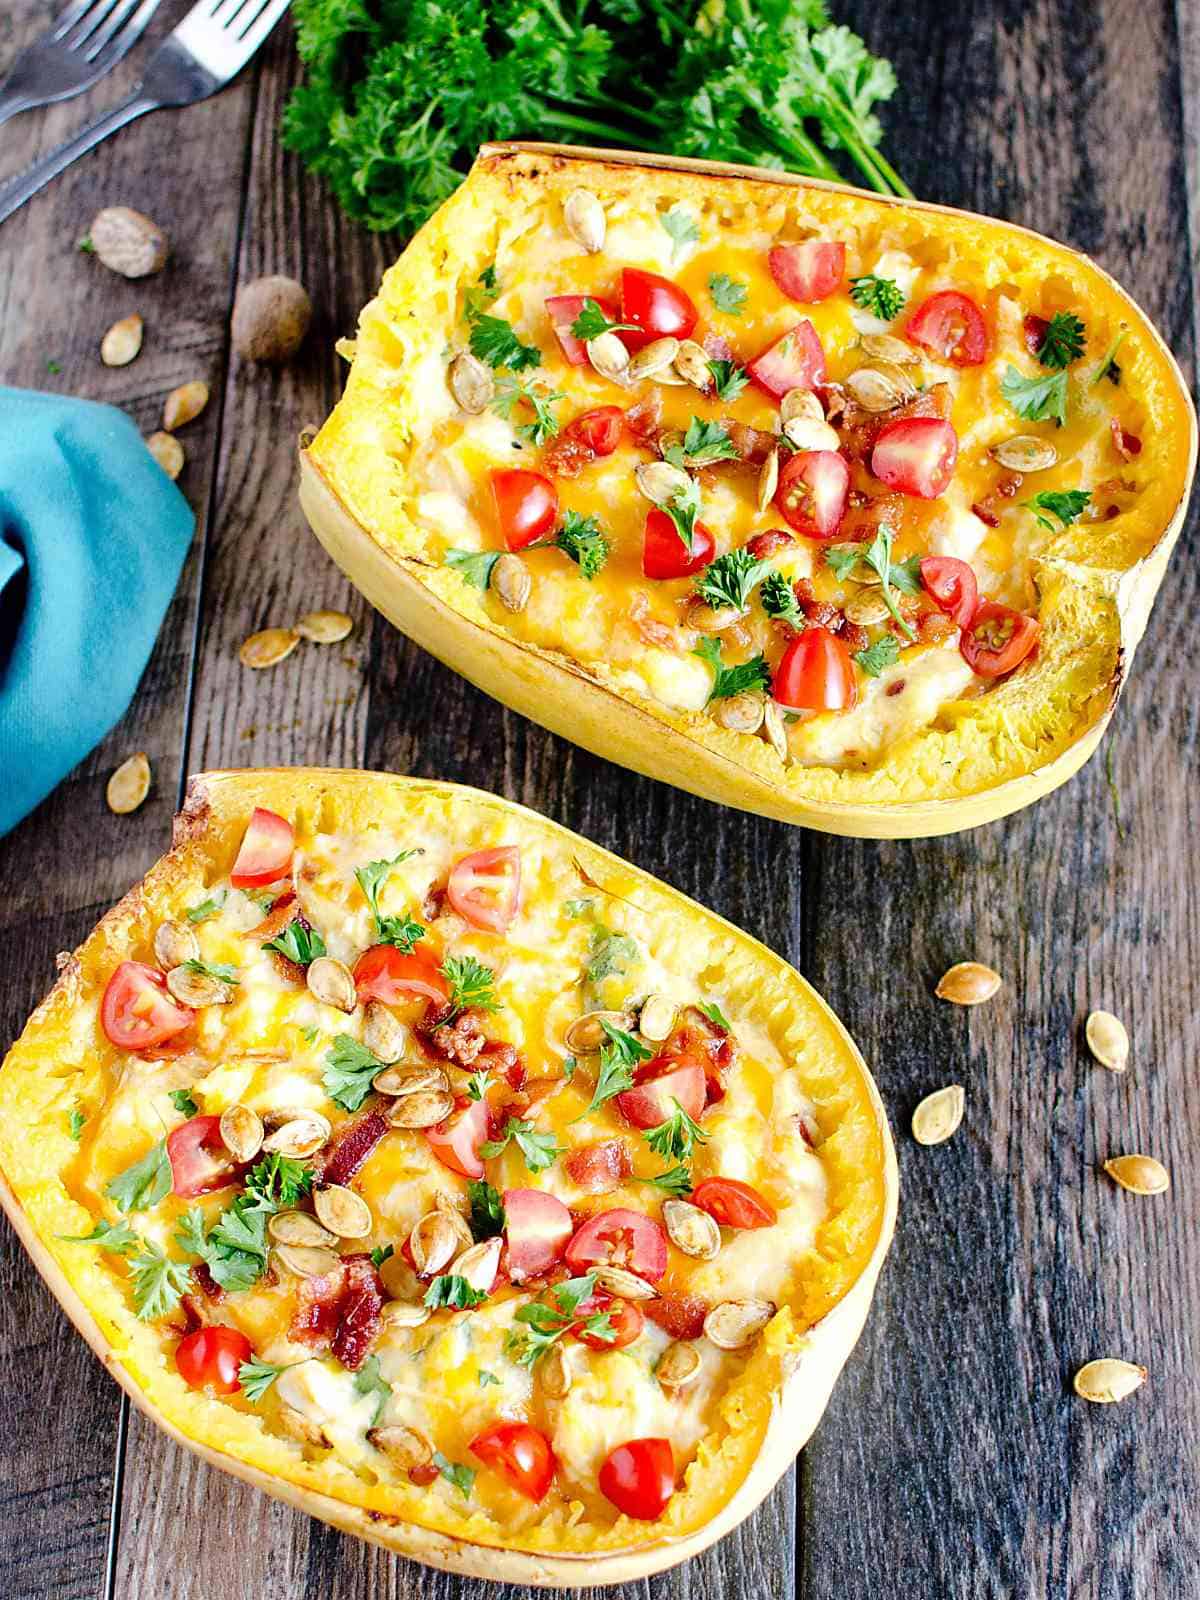 Cooked spaghetti squash loaded with cheese, spinach, and seasoning served in the shell of a spaghetti squash garnished with tomatoes, parsley, and toasted squash seeds.